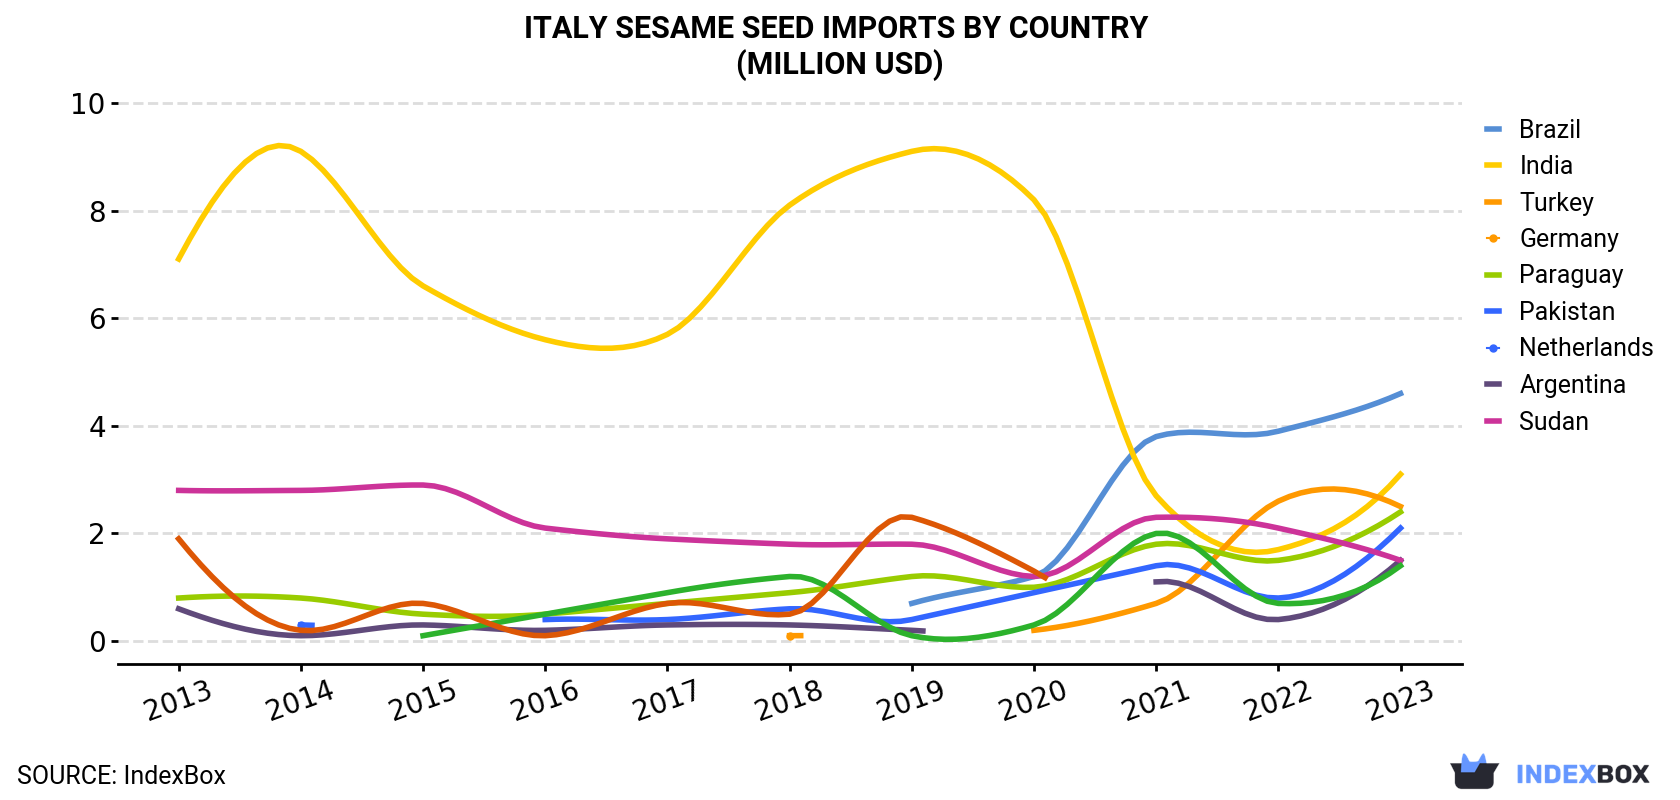 Italy Sesame Seed Imports By Country (Million USD)